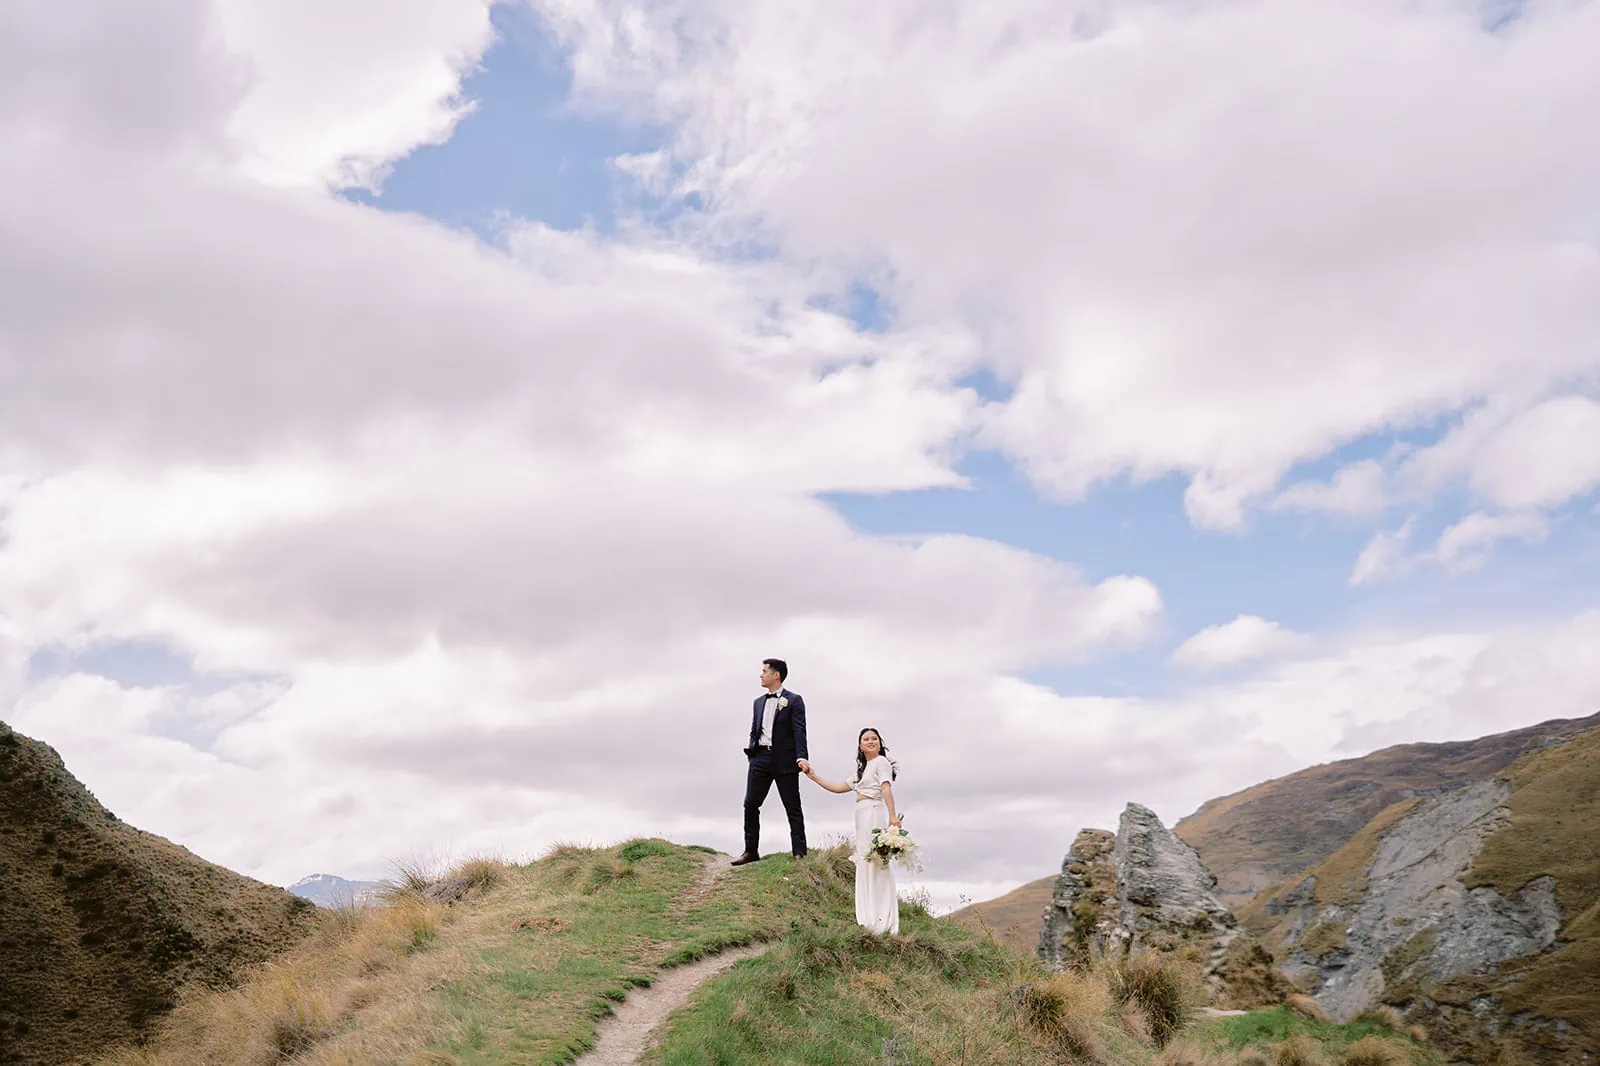 Queenstown Elopement Heli Wedding Photographer クイーンズタウン結婚式 | A man and woman posing for their pre-wedding photoshoot on a hill.